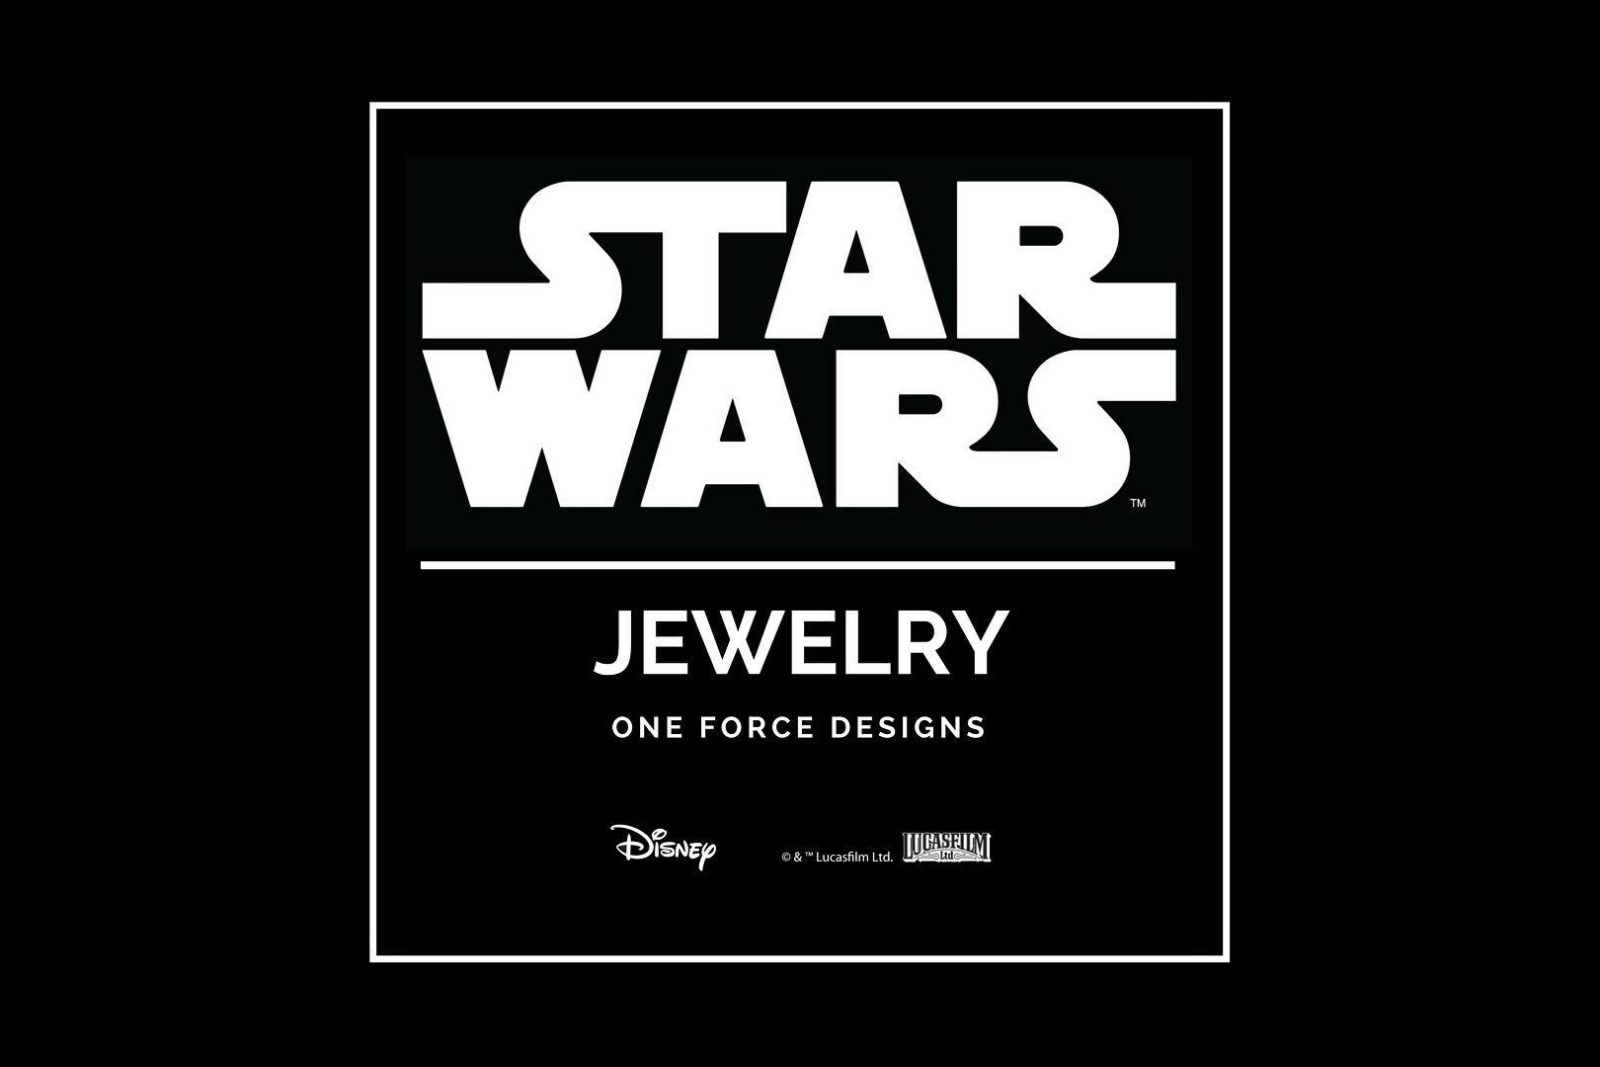 One Force Designs x Star Wars Jewelry coming soon